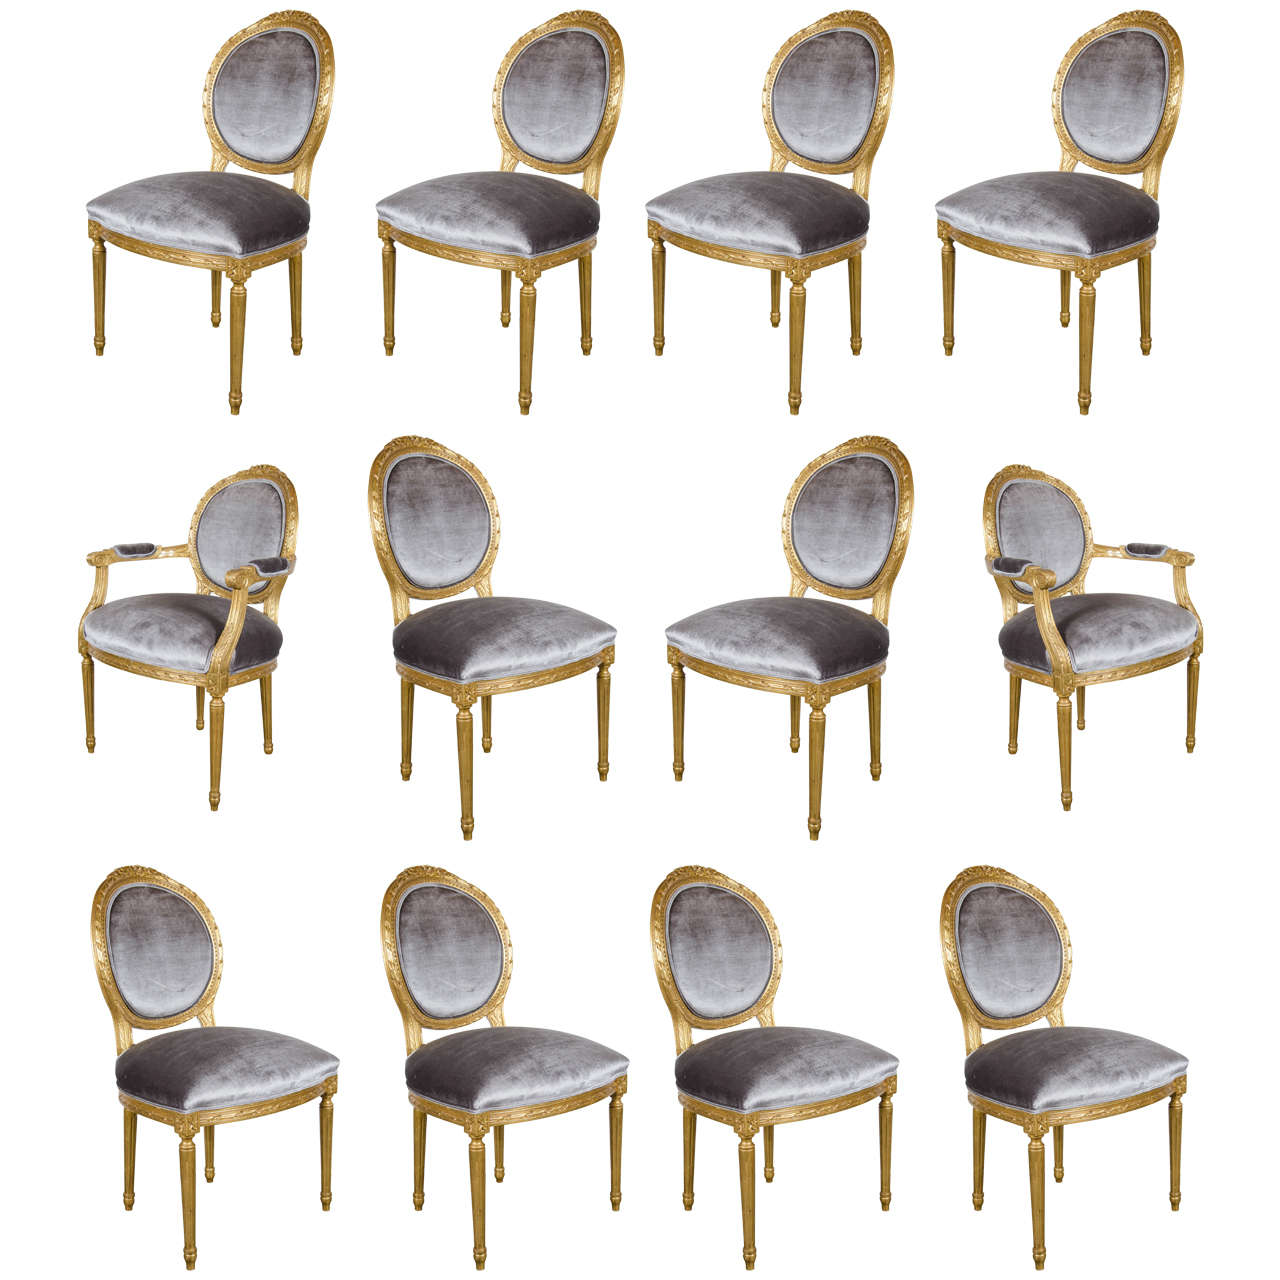 Set of 12 Louis XIV Style Hand-Carved 24-Karat Gilded Dining Chairs